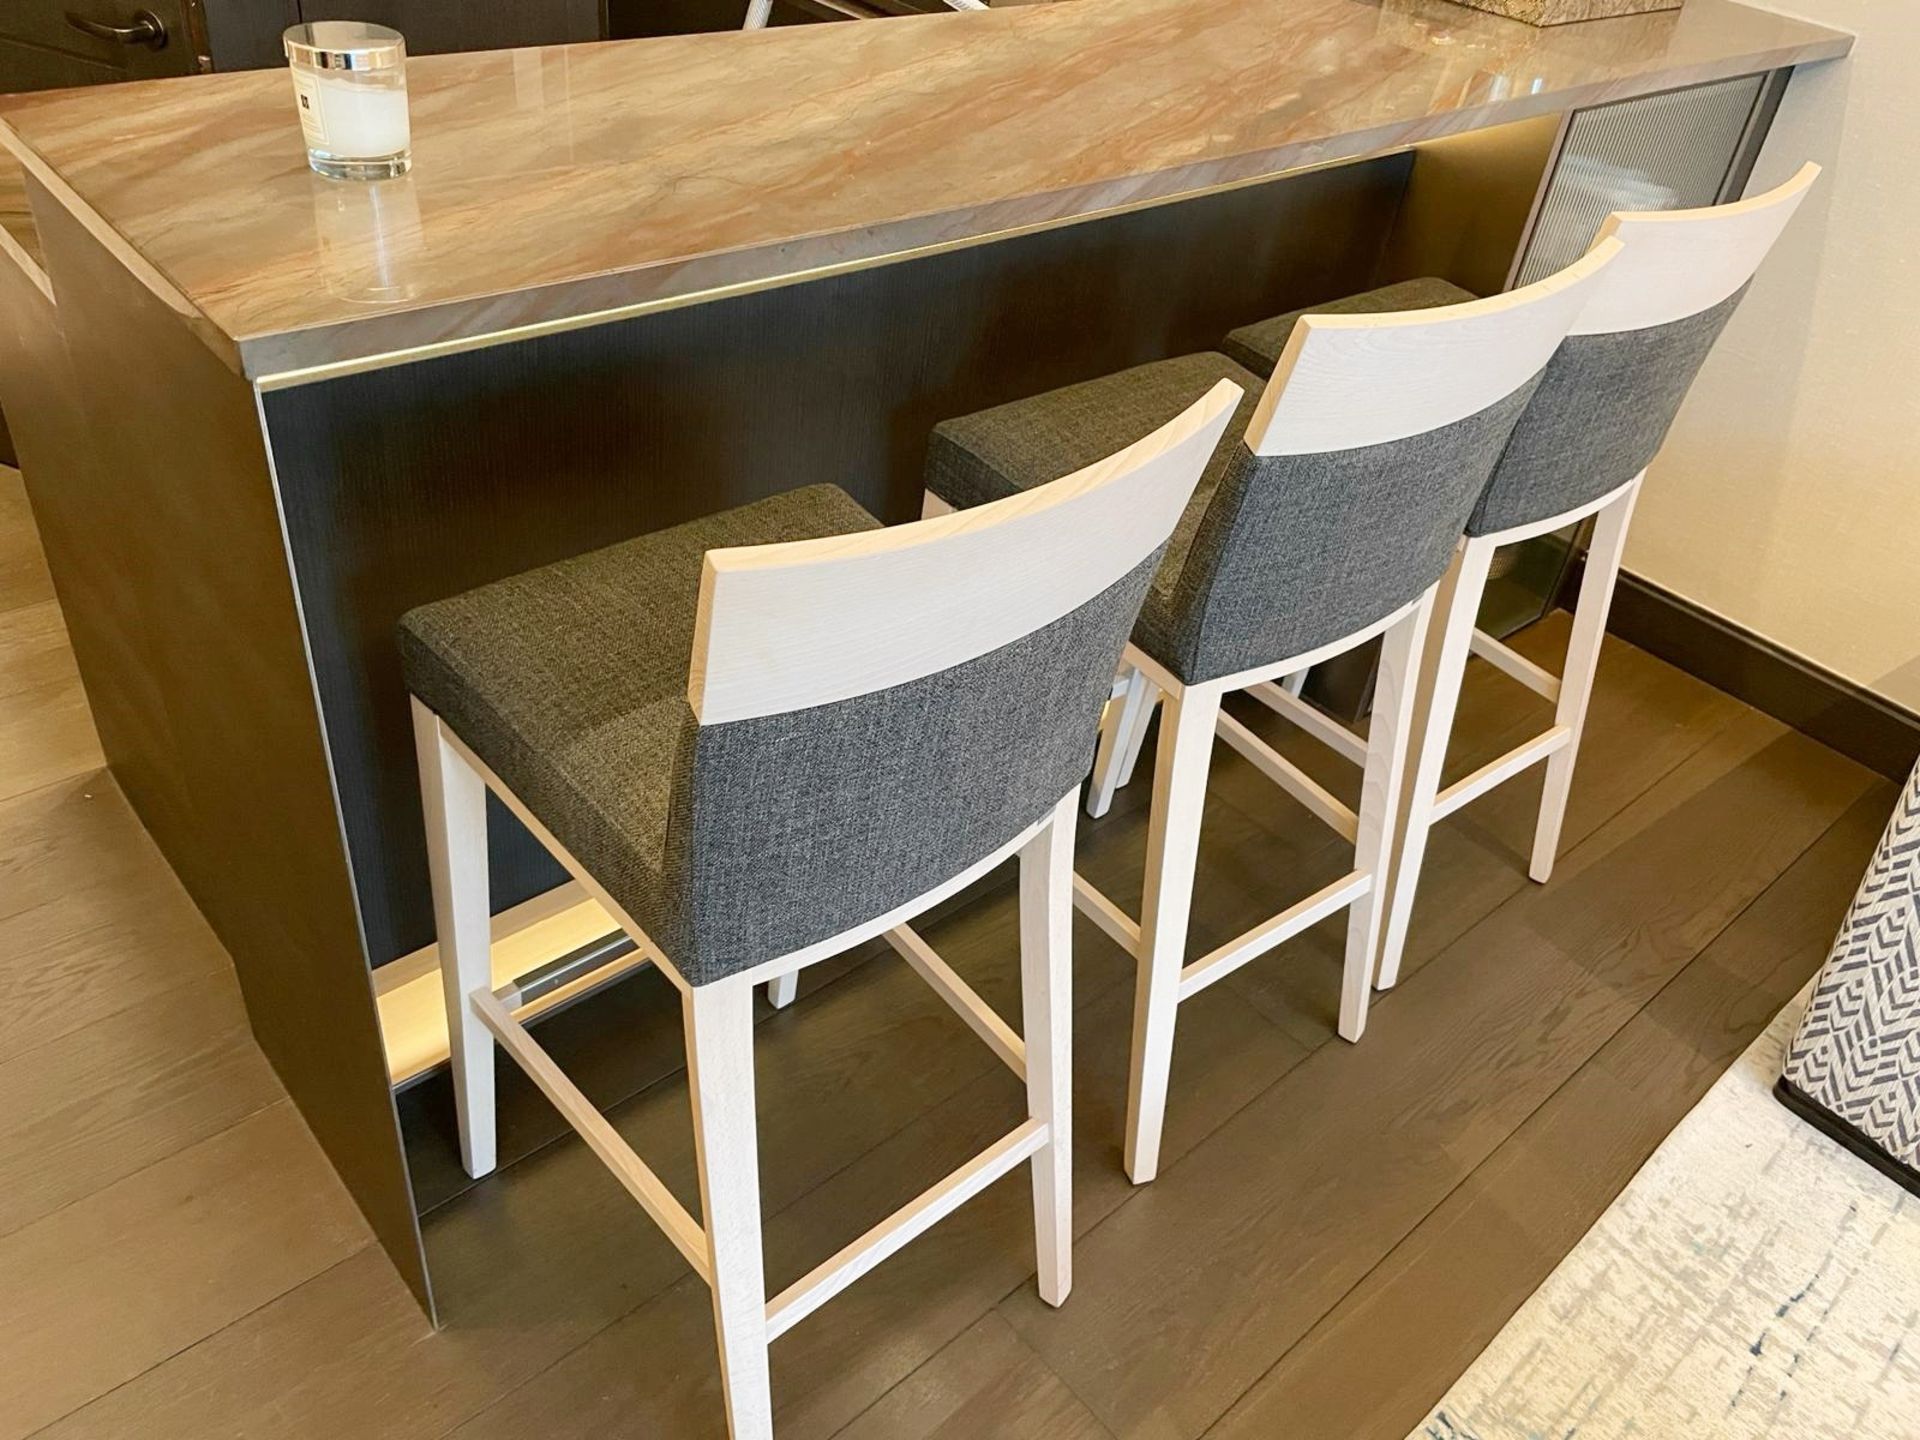 3 x MONTBEL Designer Bar Stools With Light Stained Frames And Grey Fabric Upholstery - Image 17 of 18